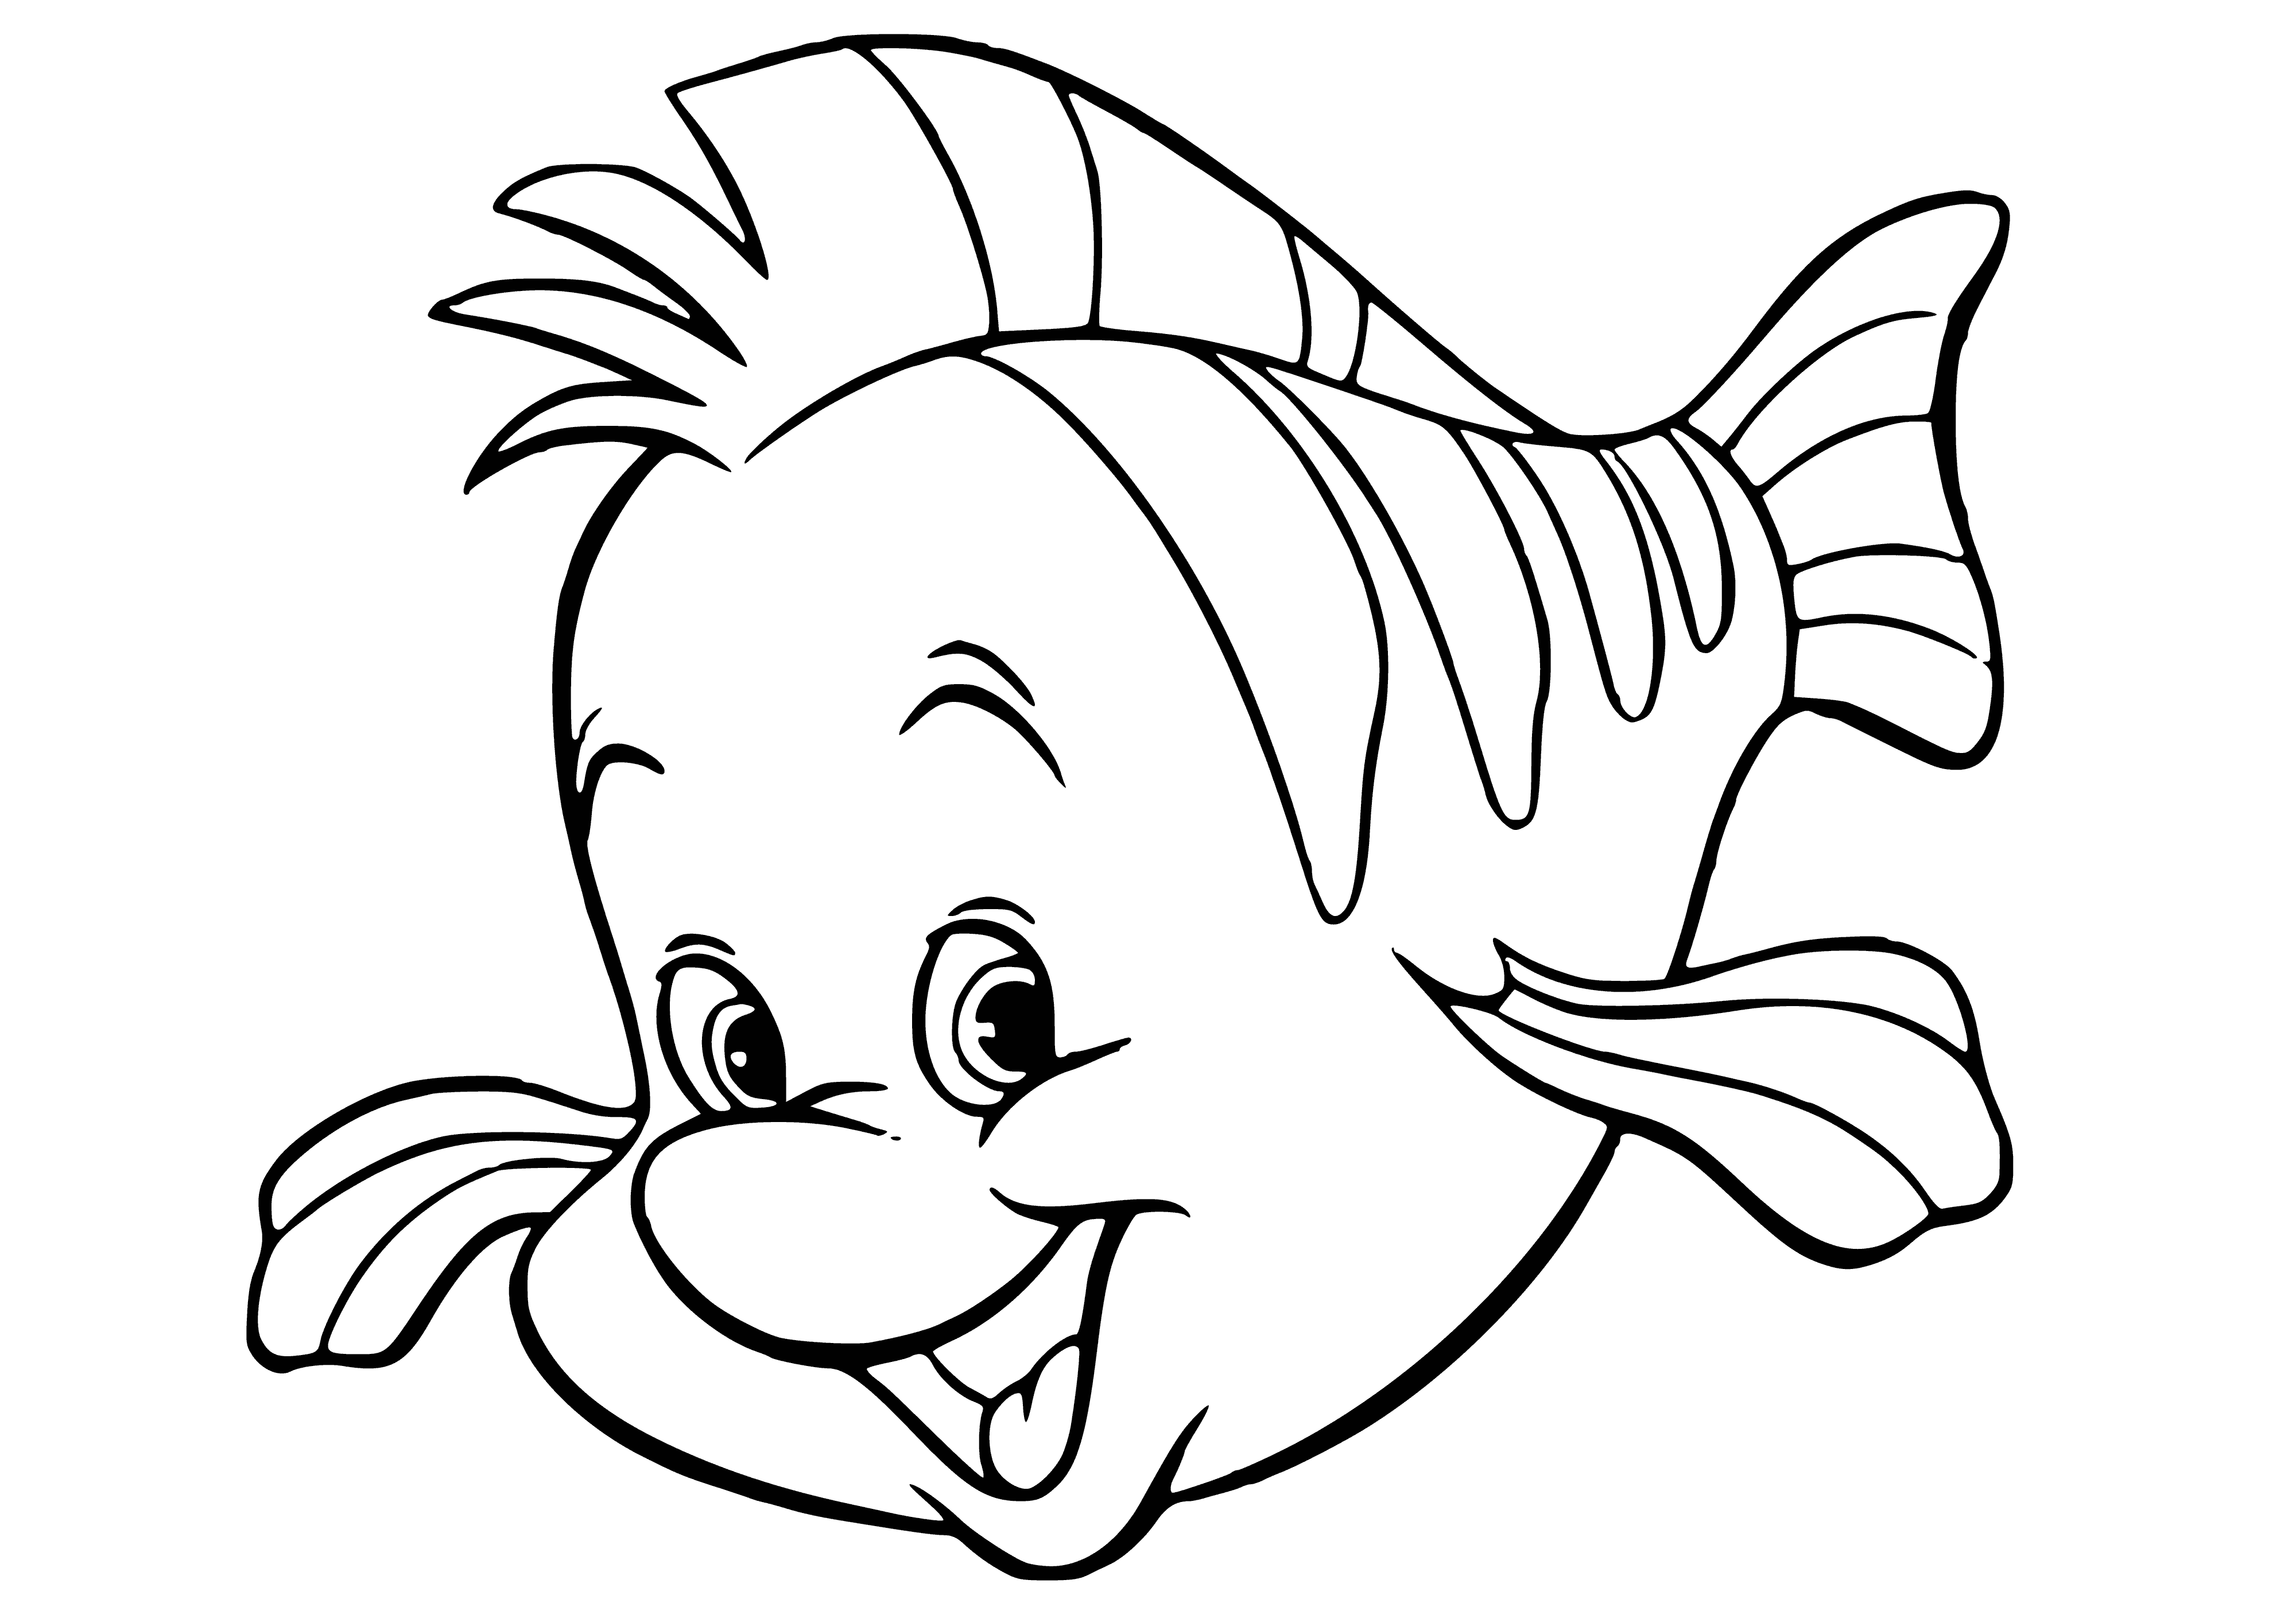 coloring page: Small blue fish with yellow fins swims to the right; large mouth, blue eyes, slightly curved body.